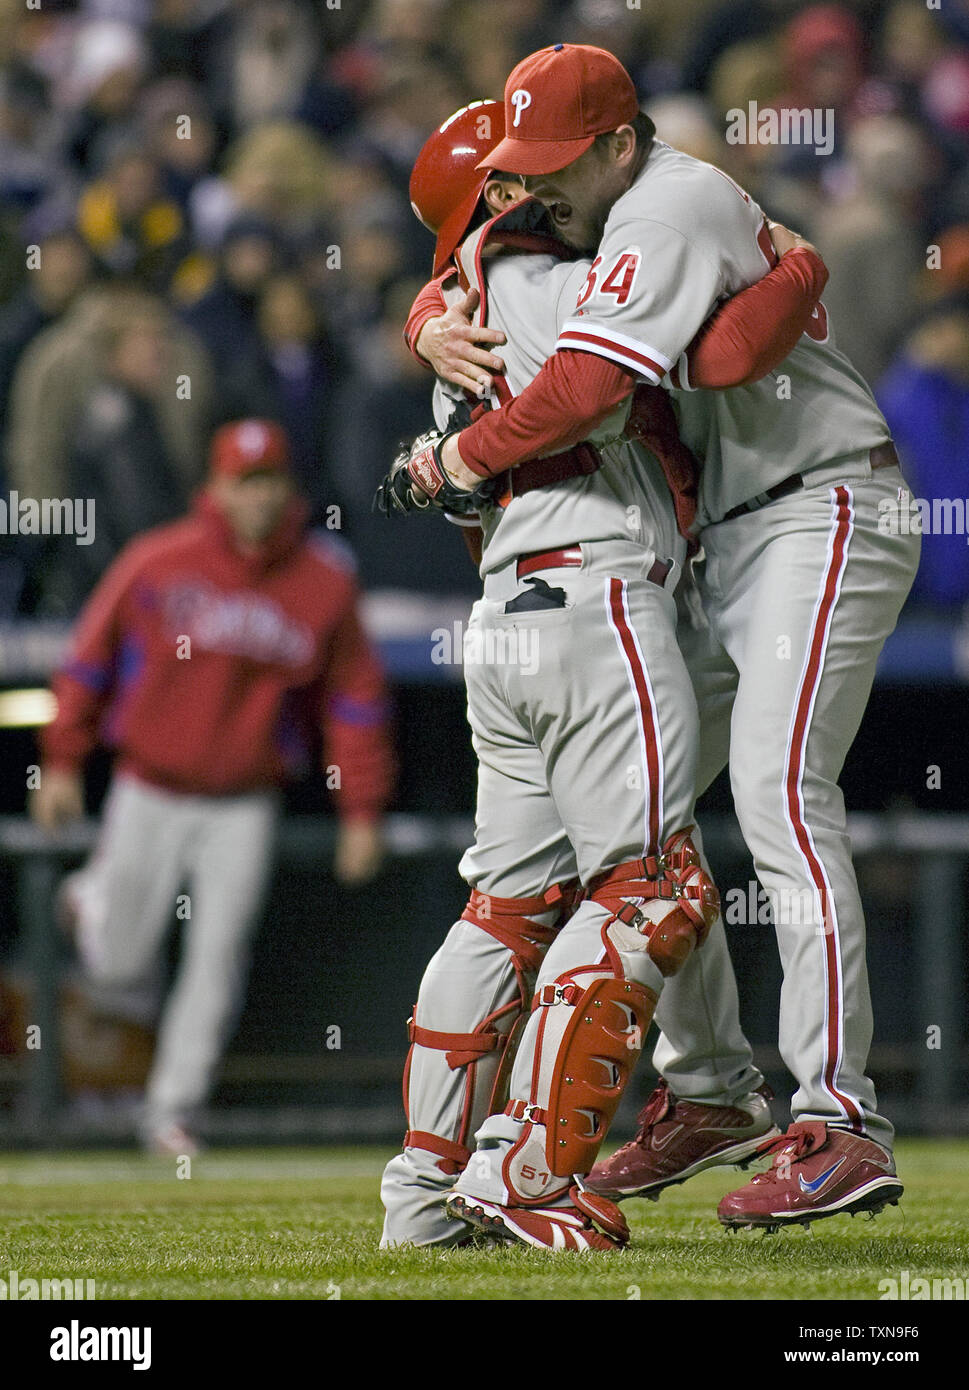 Philadelphia Phillies pitcher Brad Lidge (R) hugs catcher Carlos Ruiz after  striking out Colorado Rockies shortstop Troy Tulowitki to preserve the  Phillies come from behind win during game four of the National